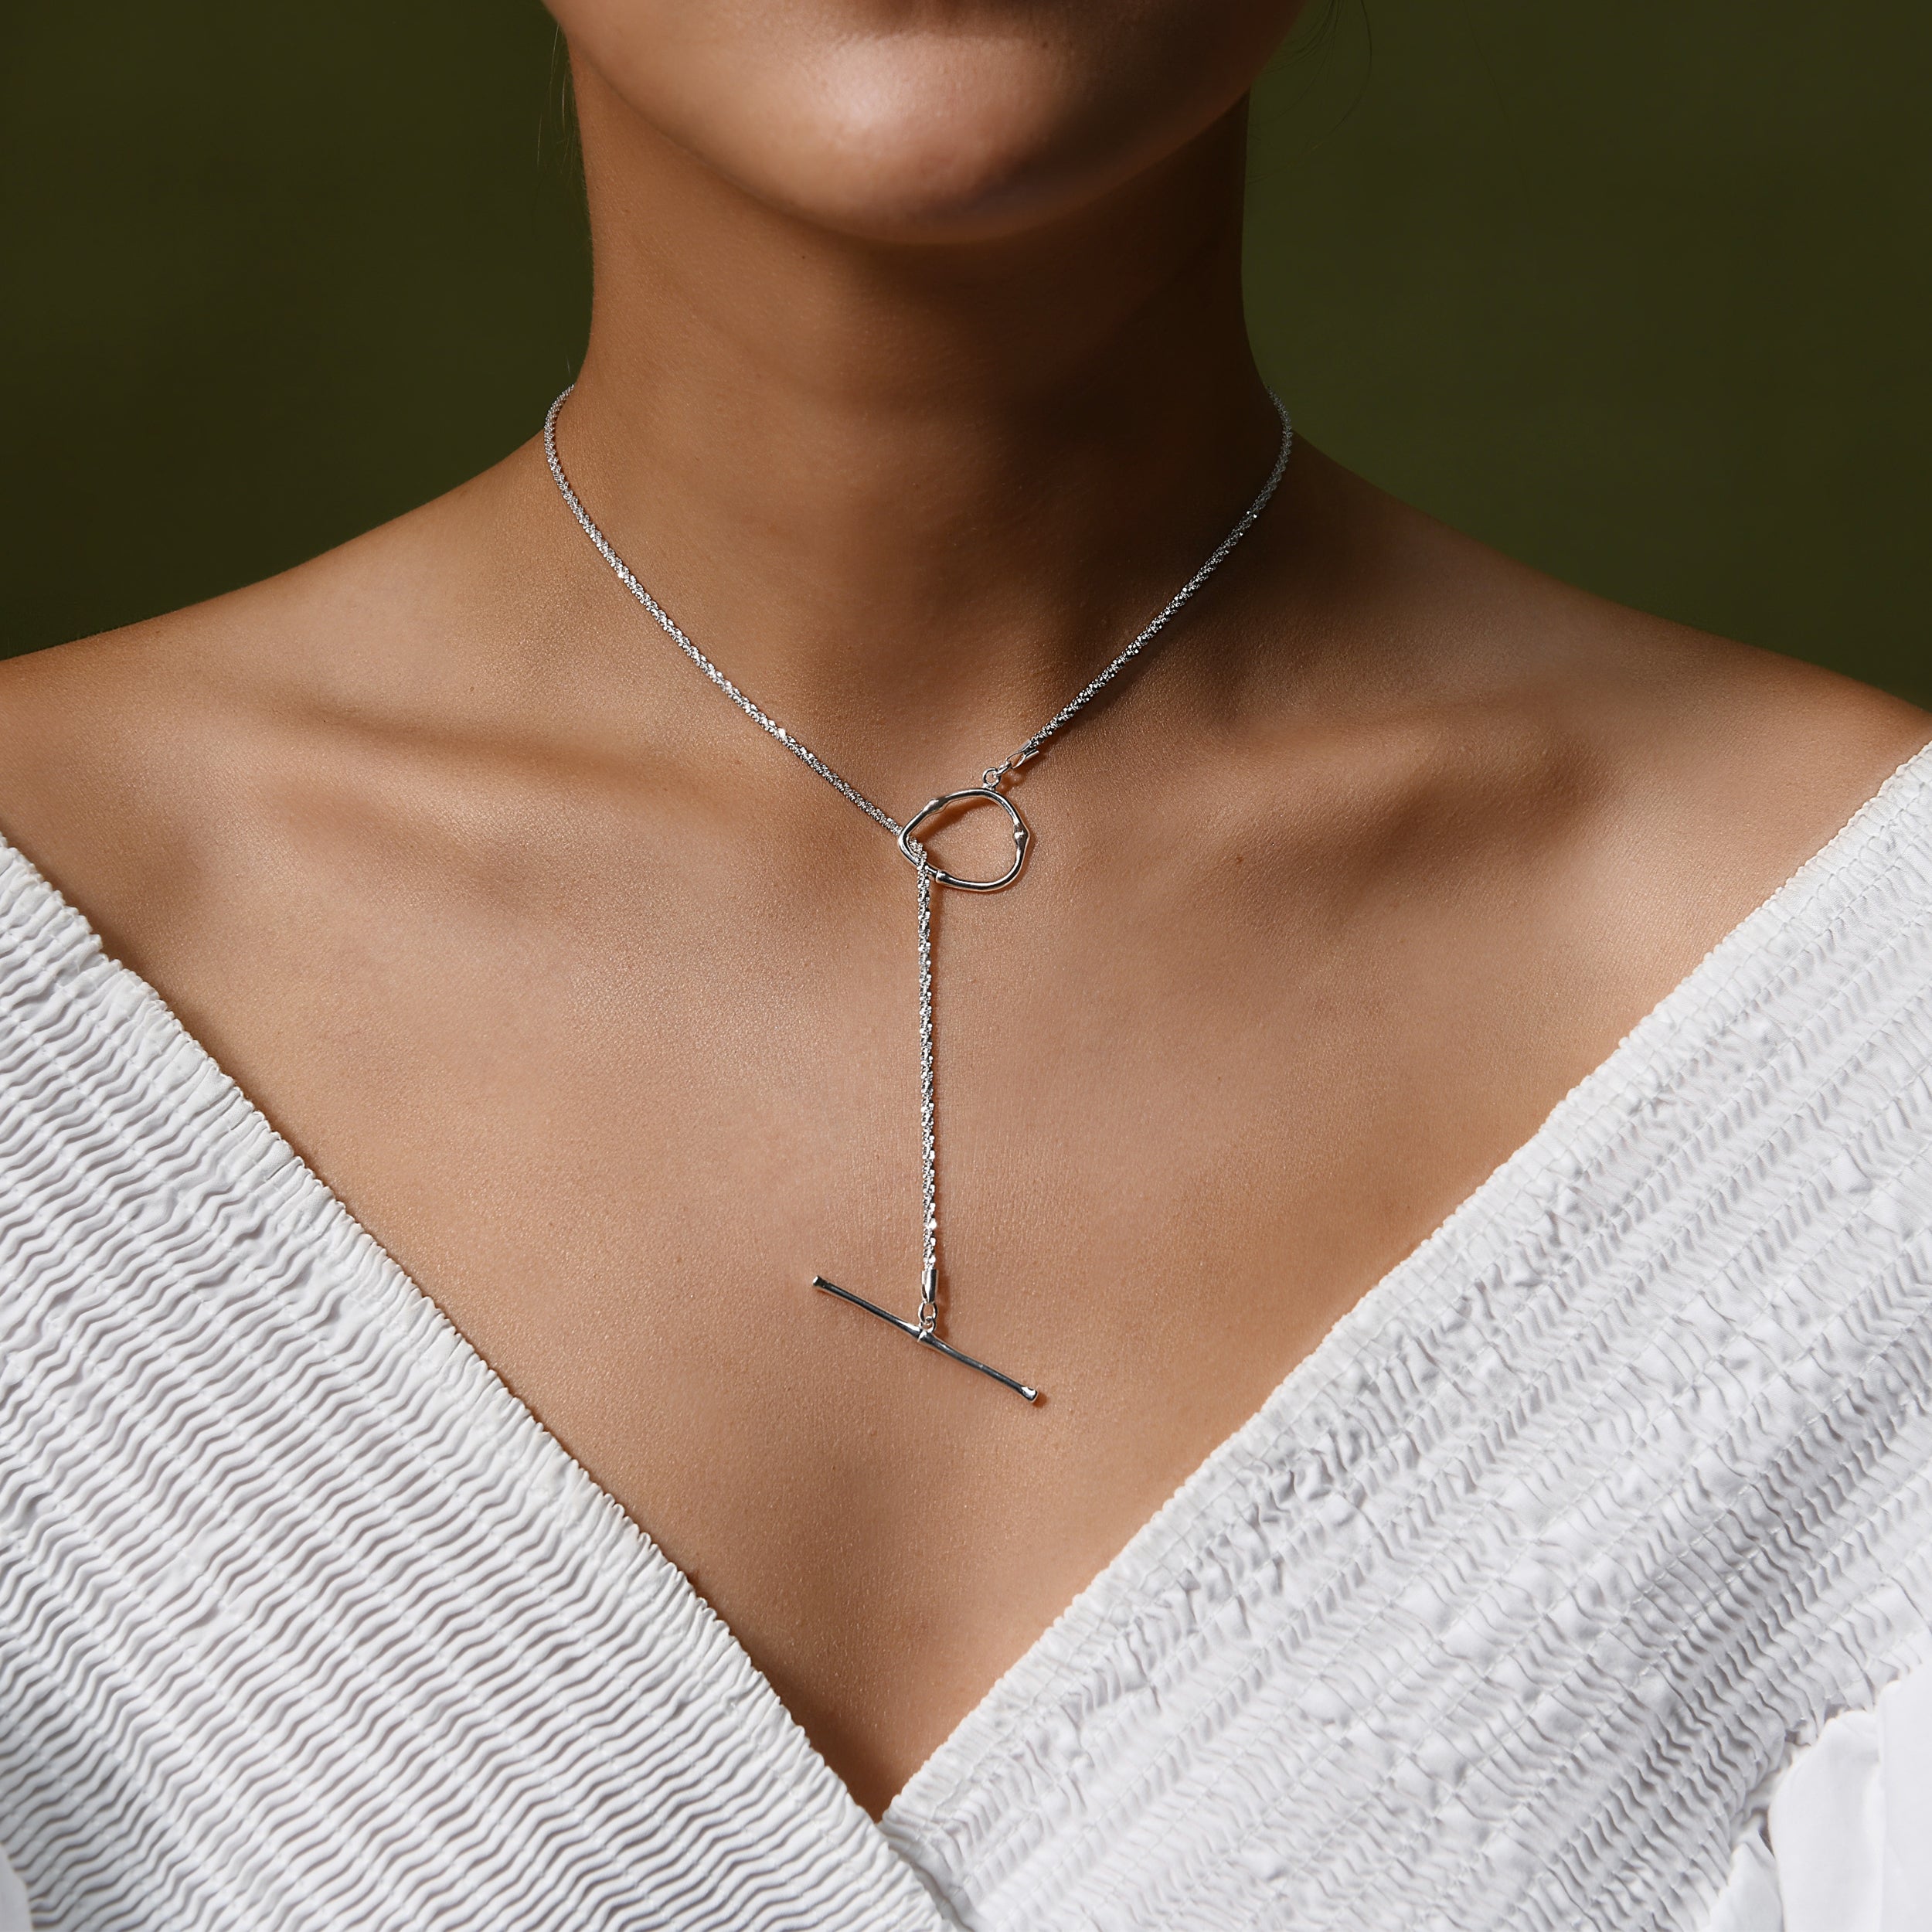 a female model close up photo of the neck wearing a sleek shimmering silver rope chain with a silver toggle 